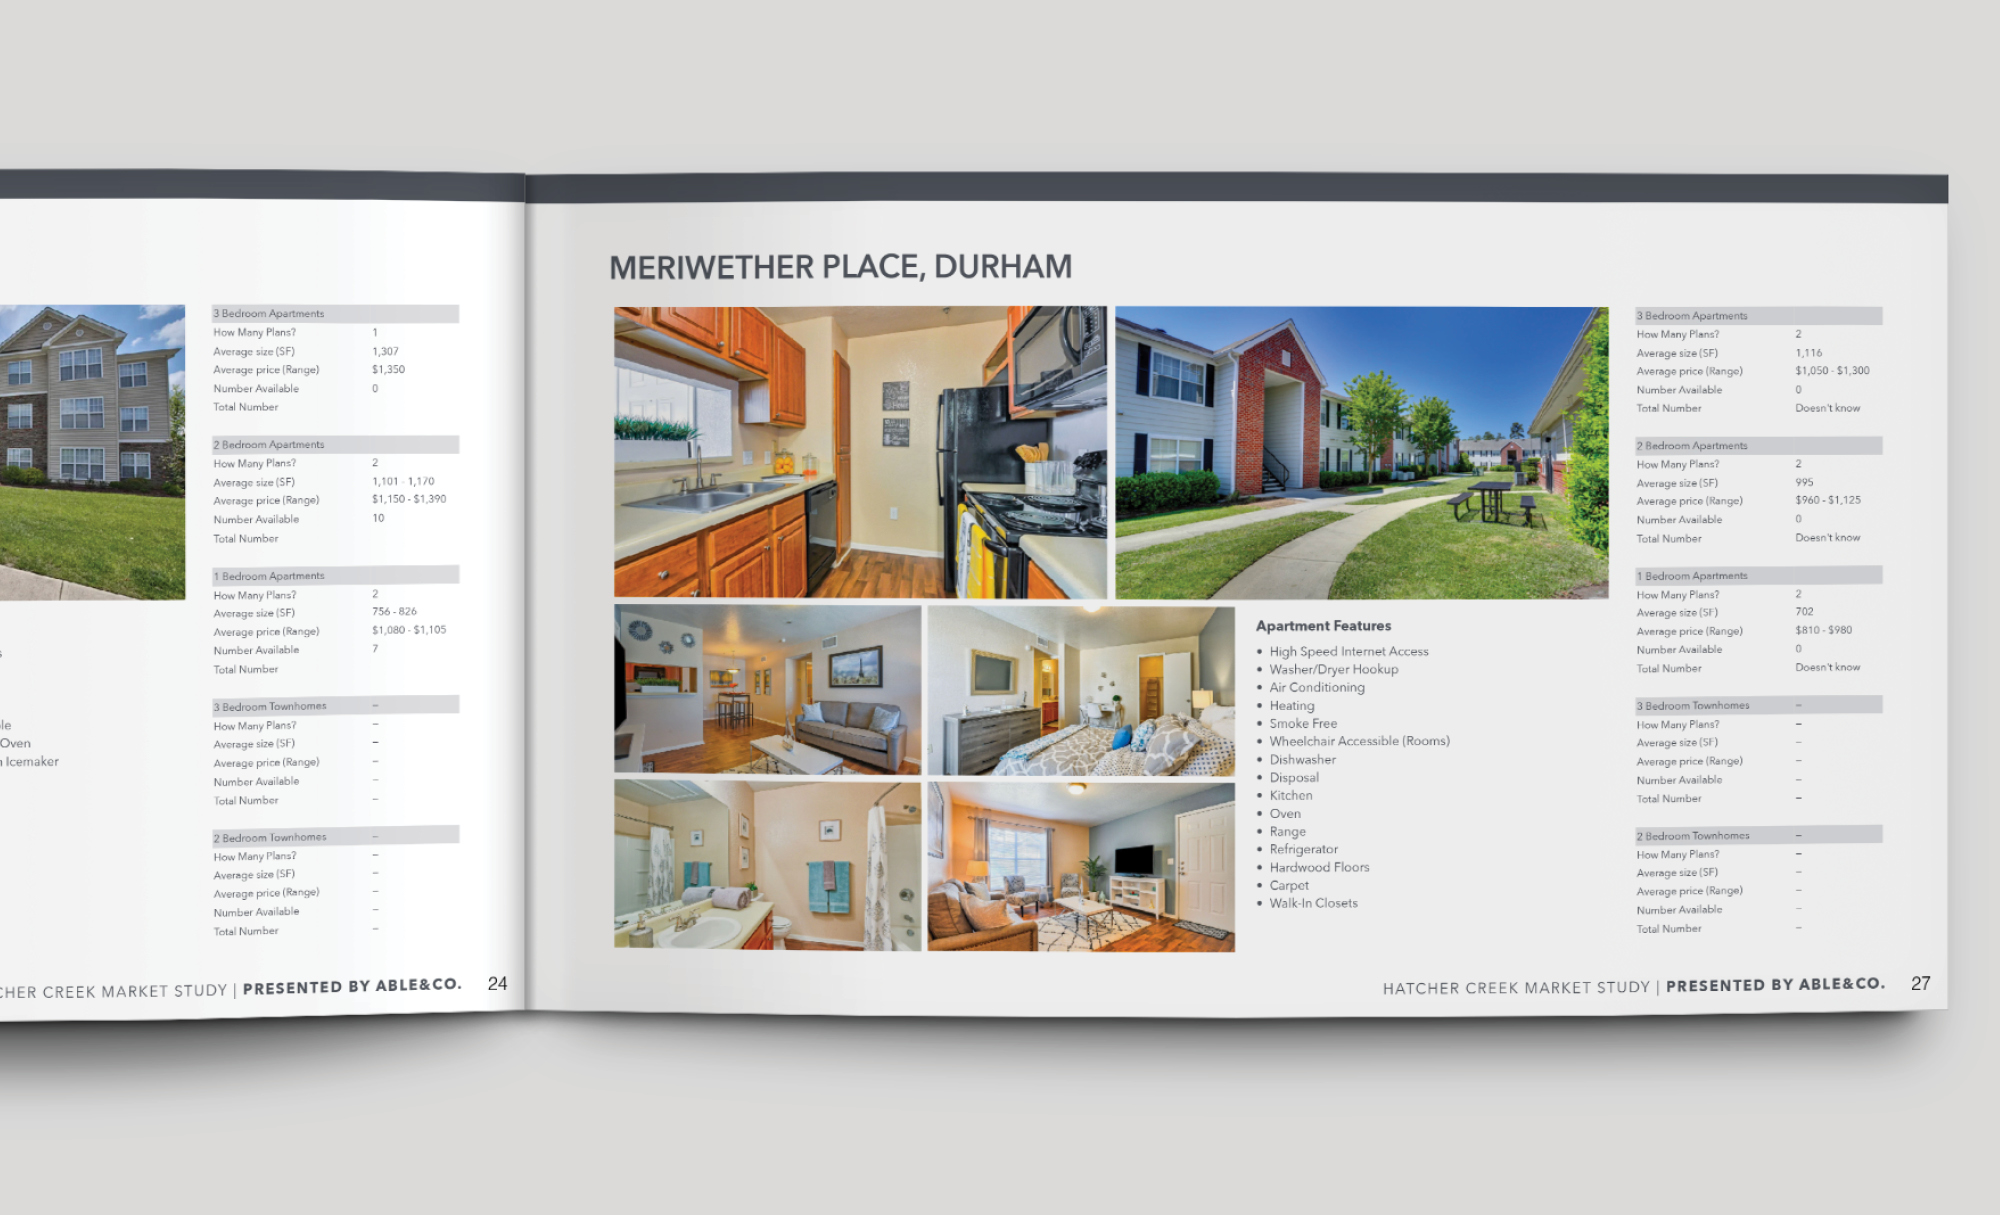 Competition pages from a market study for the Hatcher Creek community in Creedmoor North Carolina